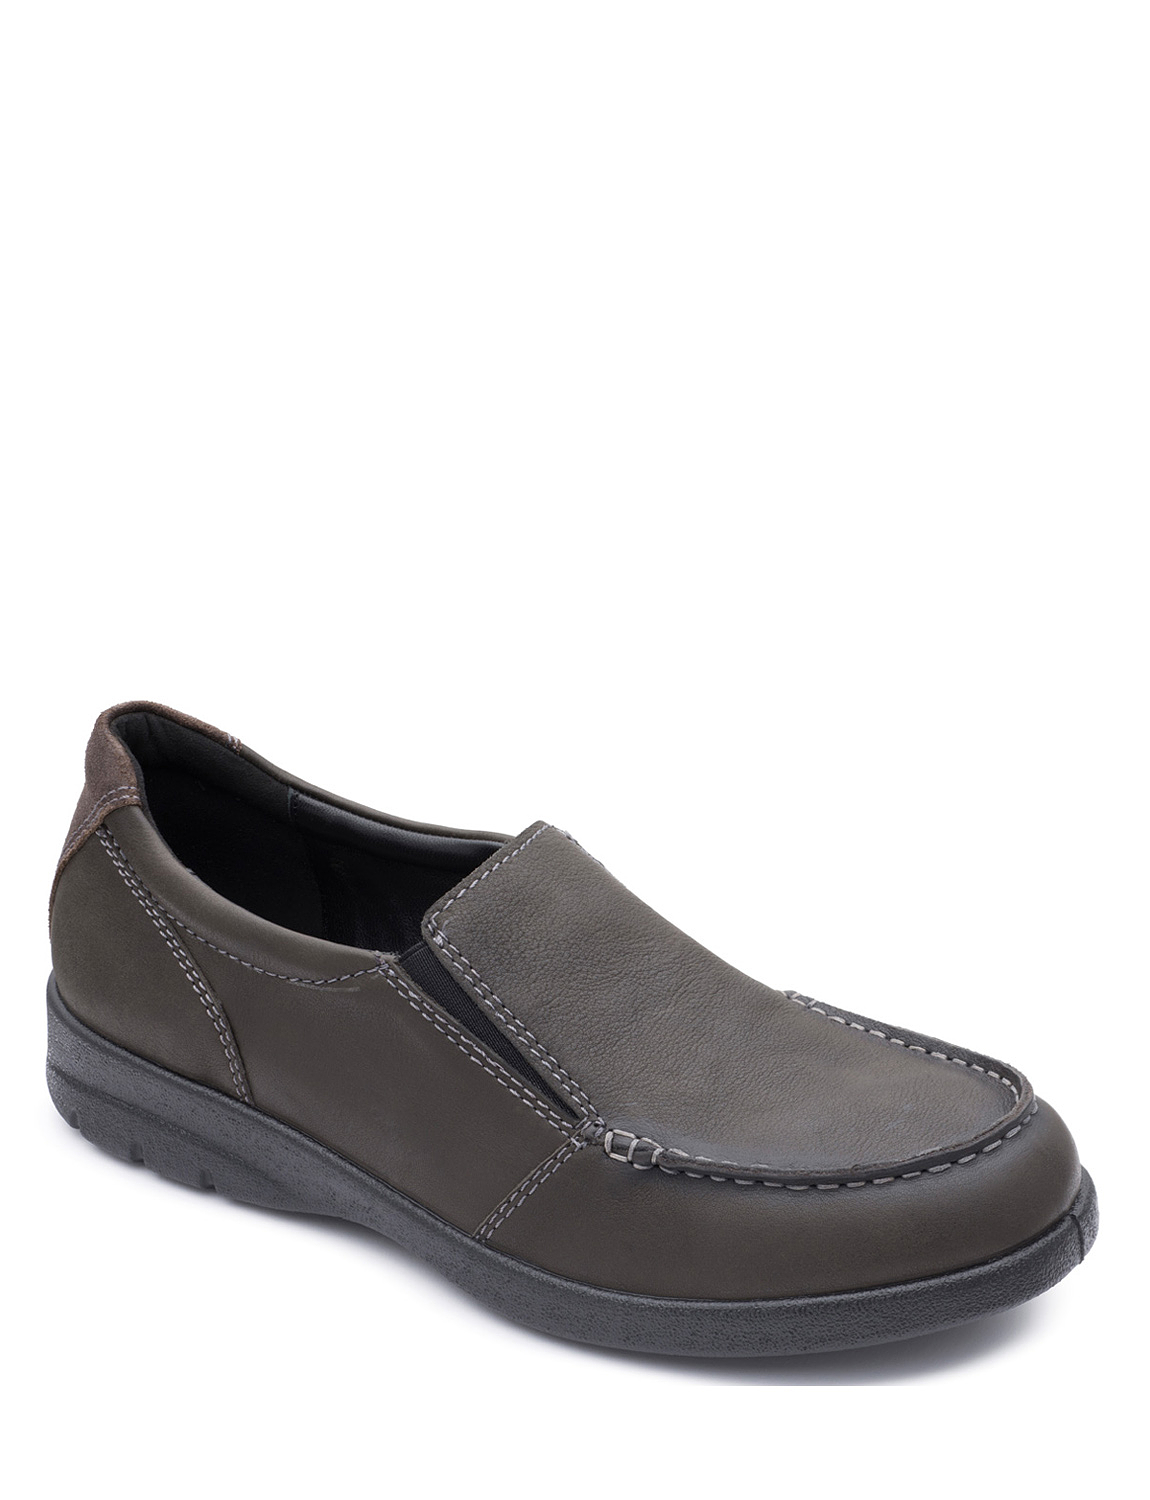 Mens Padders Comet Wide F Fit Slip On Shoe | Chums